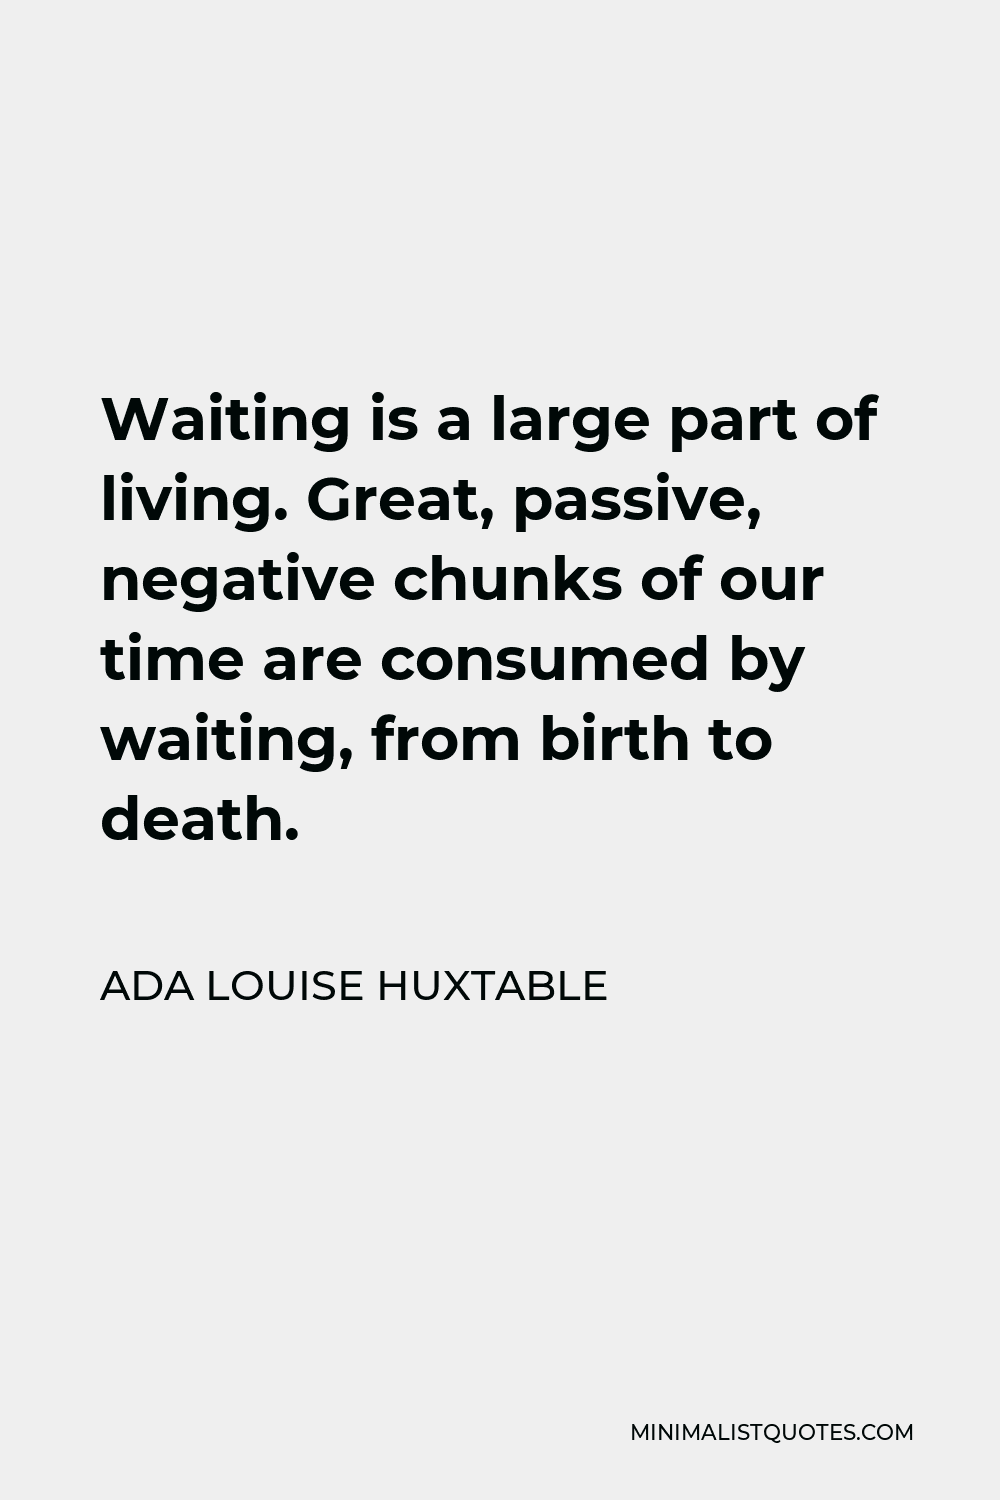 Ada Louise Huxtable Quote: Waiting is a large part of living ...